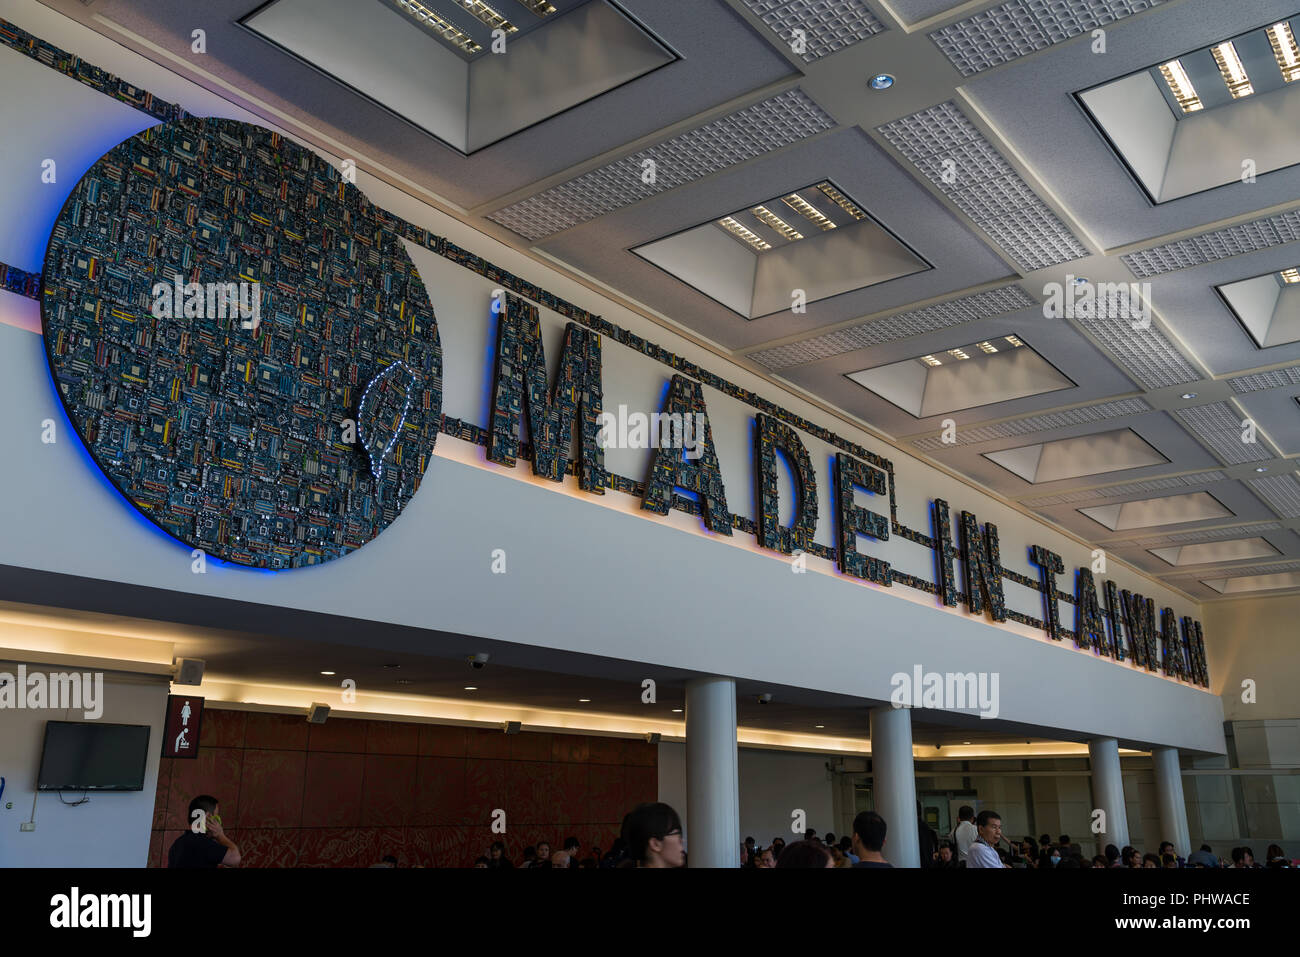 'Made in Taiwan' wall decoration made of electronic circuit boards at Taoyuan International Airport. Taiwan, China. Stock Photo